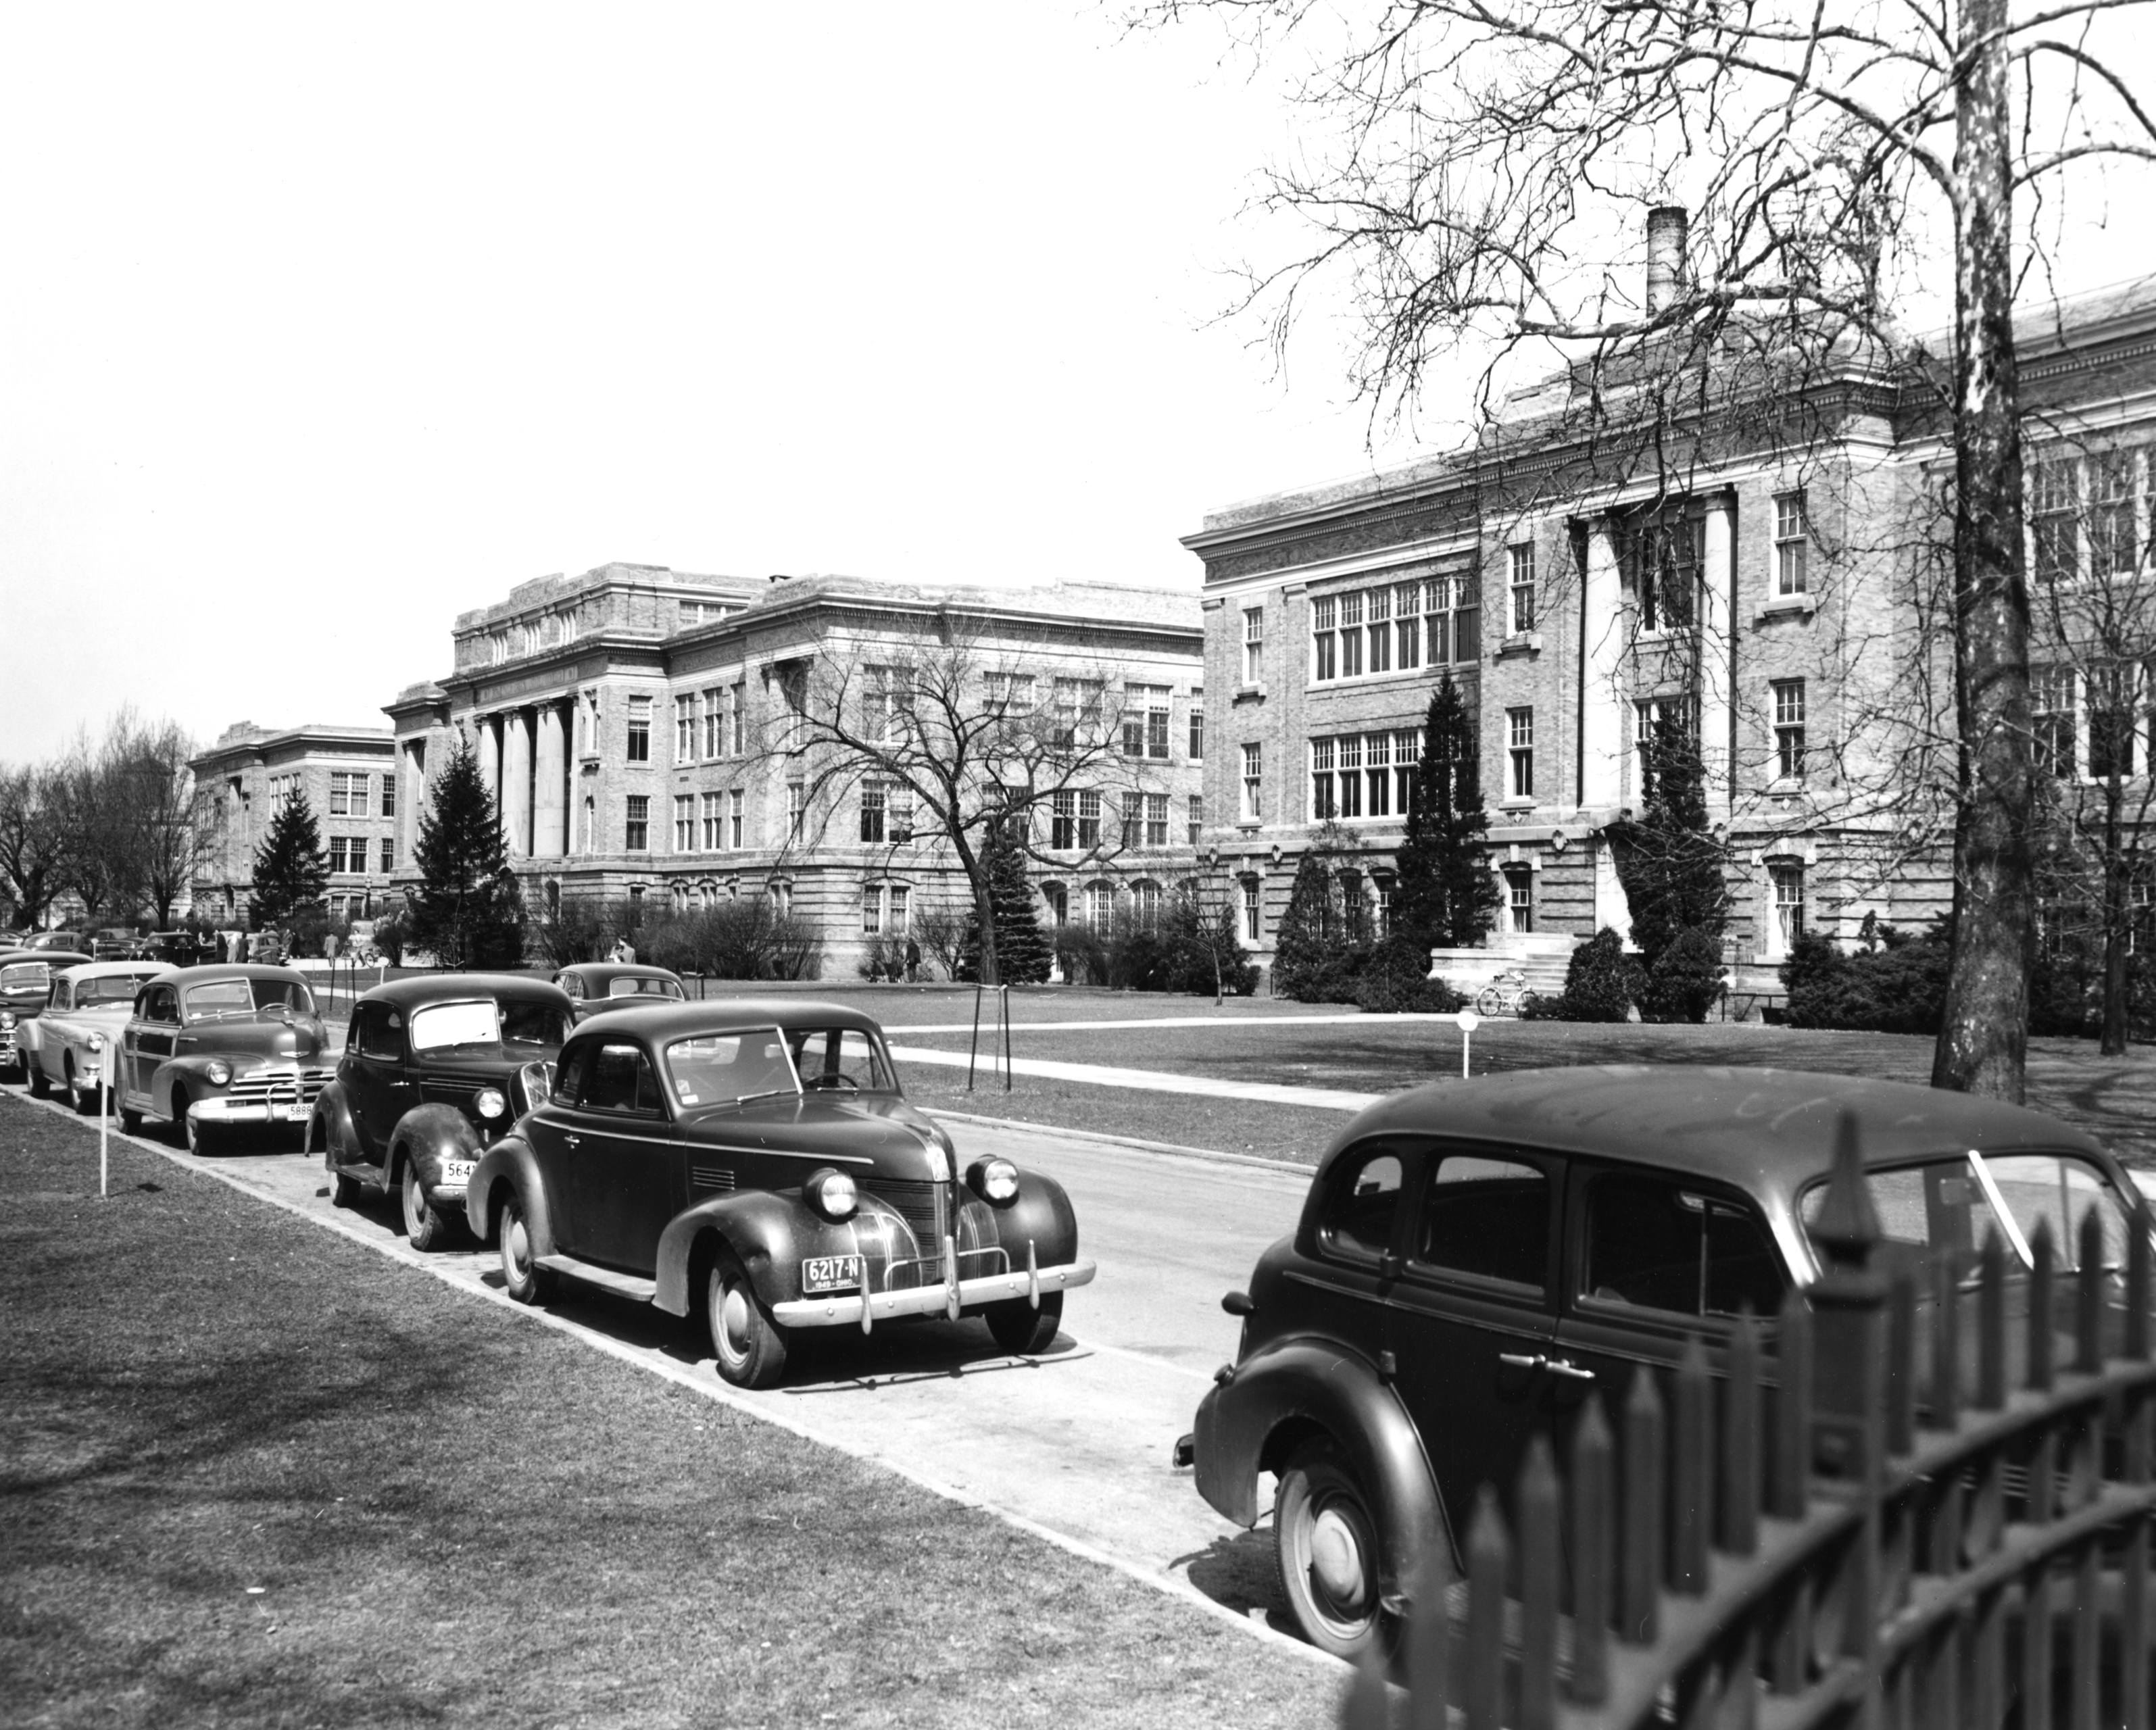 In the early years, cars could park on the street in front of the Traditions Buildings.